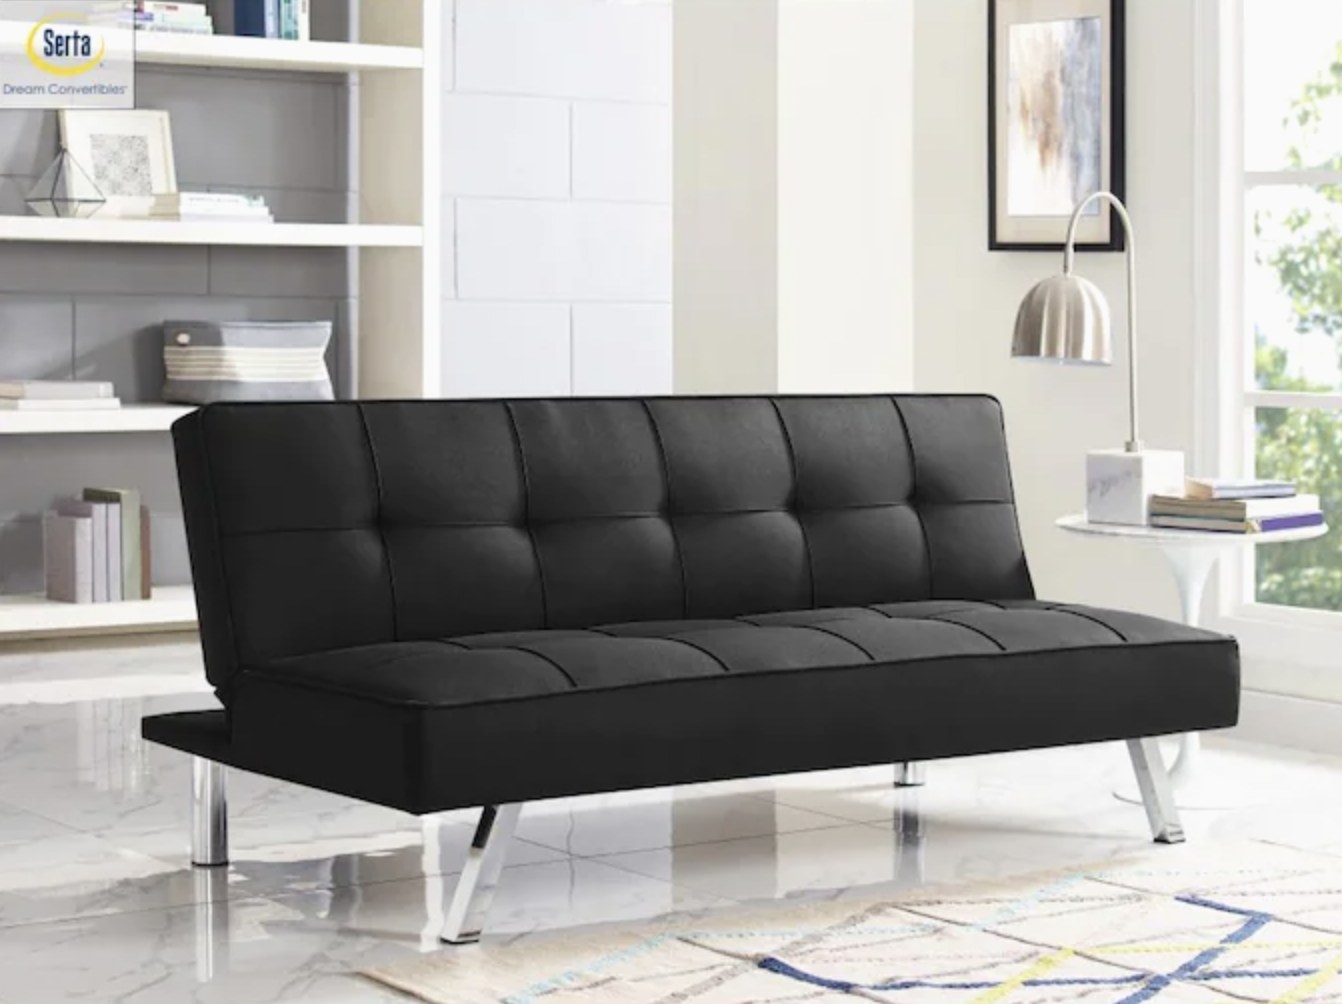 Black sofa bed propped upwards in a recline position on a white floor